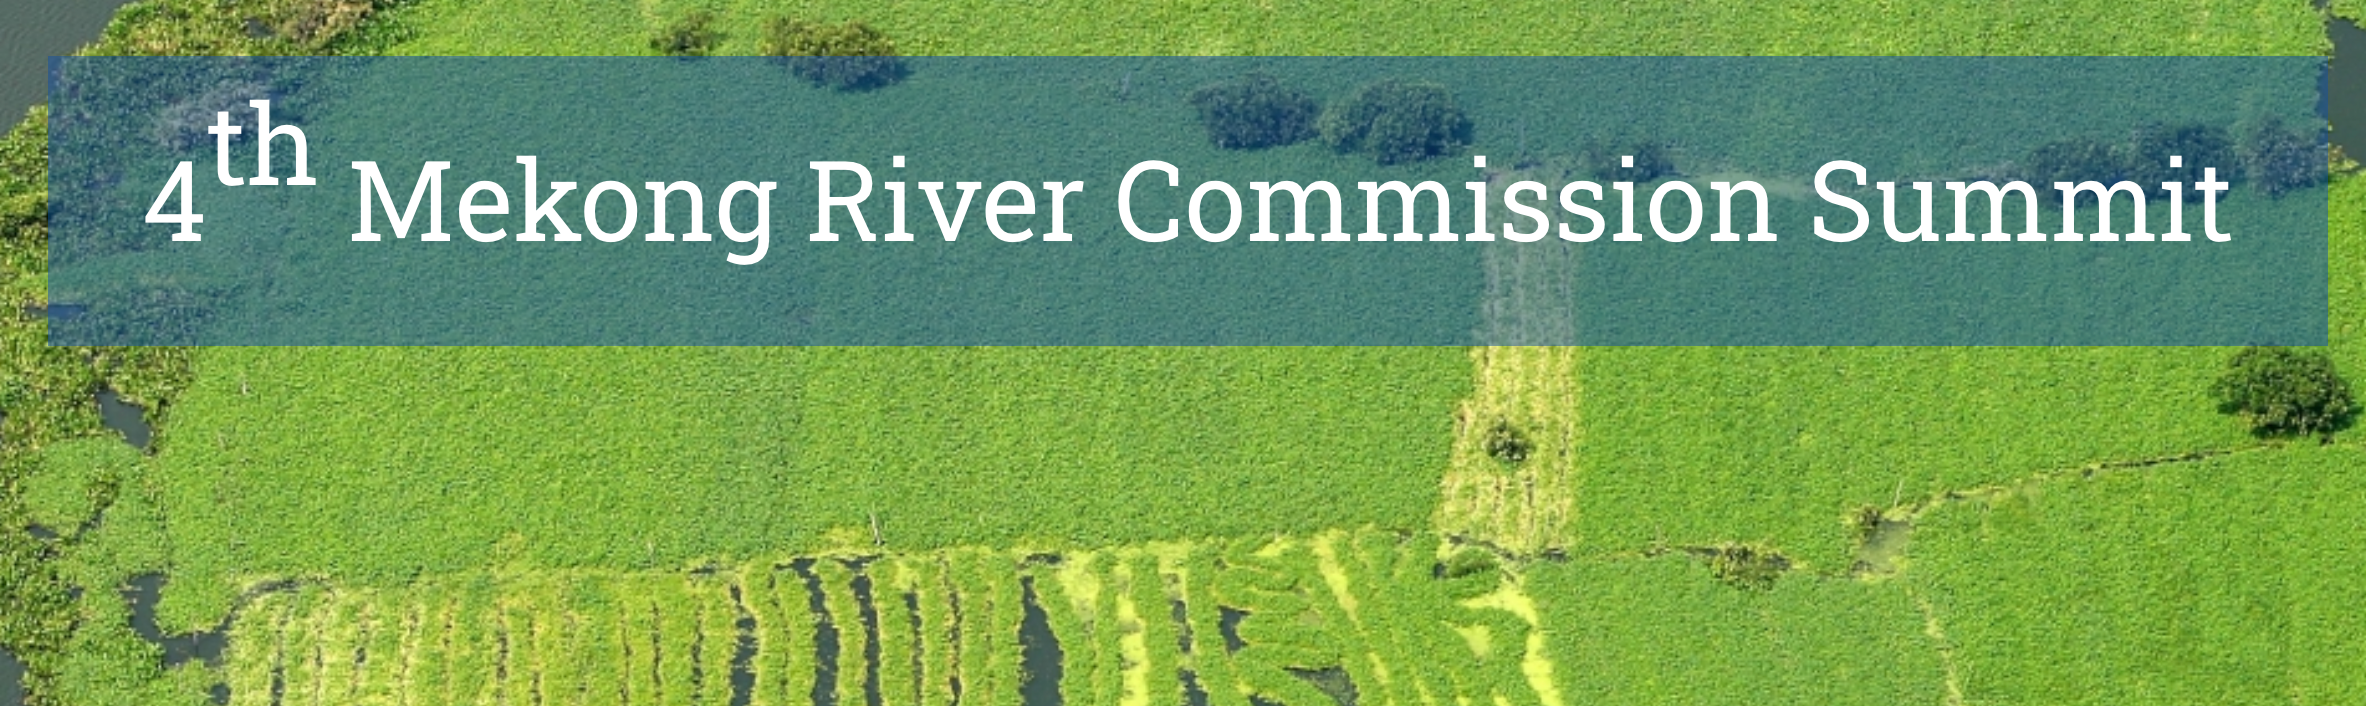 4th Mekong River Commission Summit